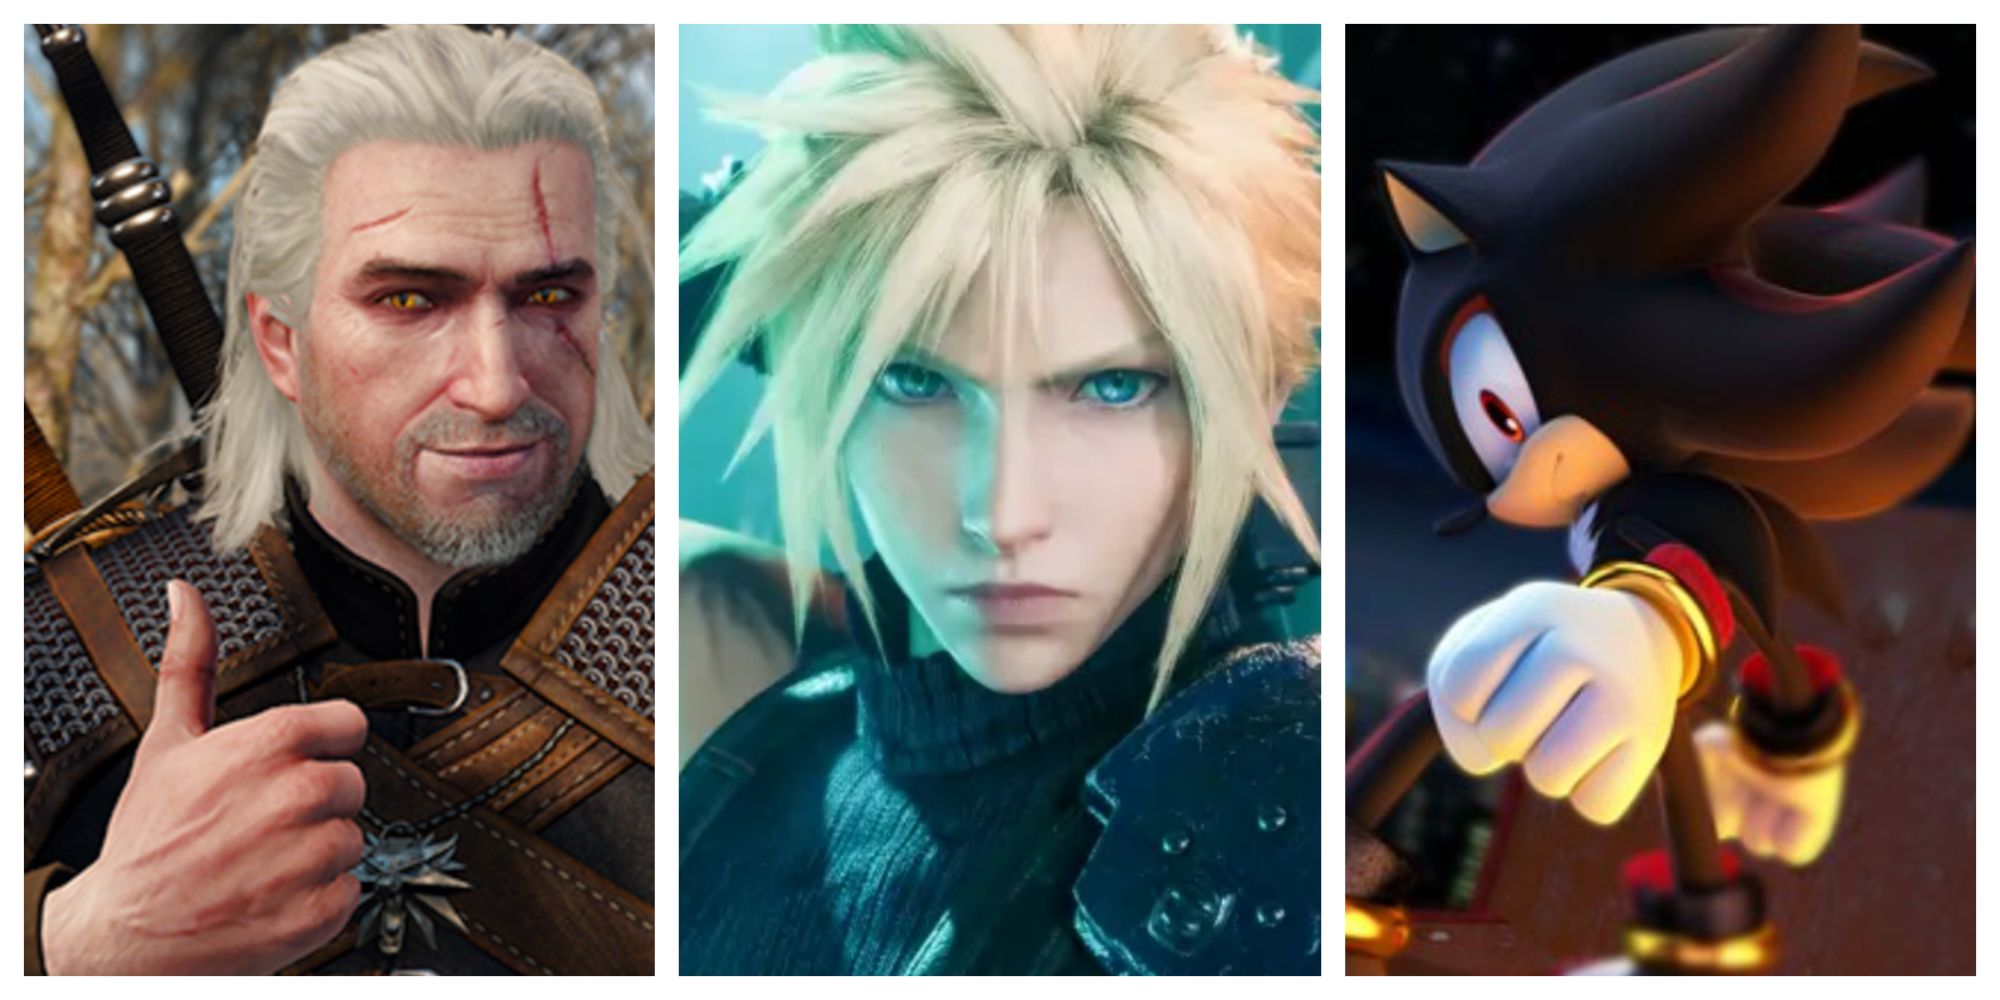 geralt from the witcher 3, cloud from final fantasy 7 and shadow from sonic the hedgehog